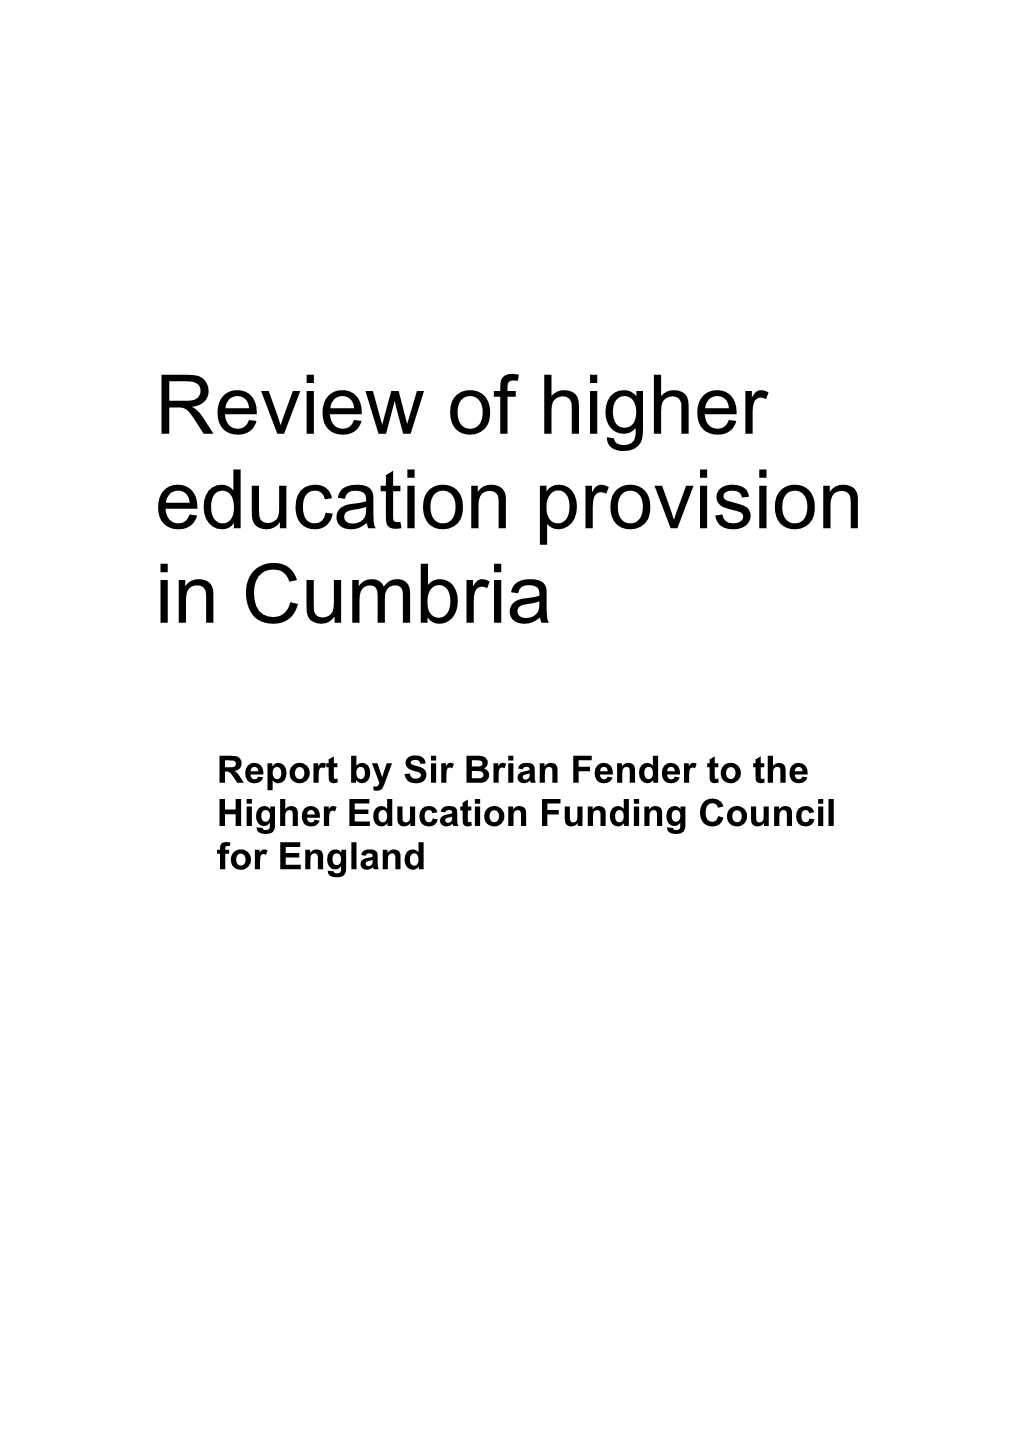 Review of Higher Education Provision in Cumbria